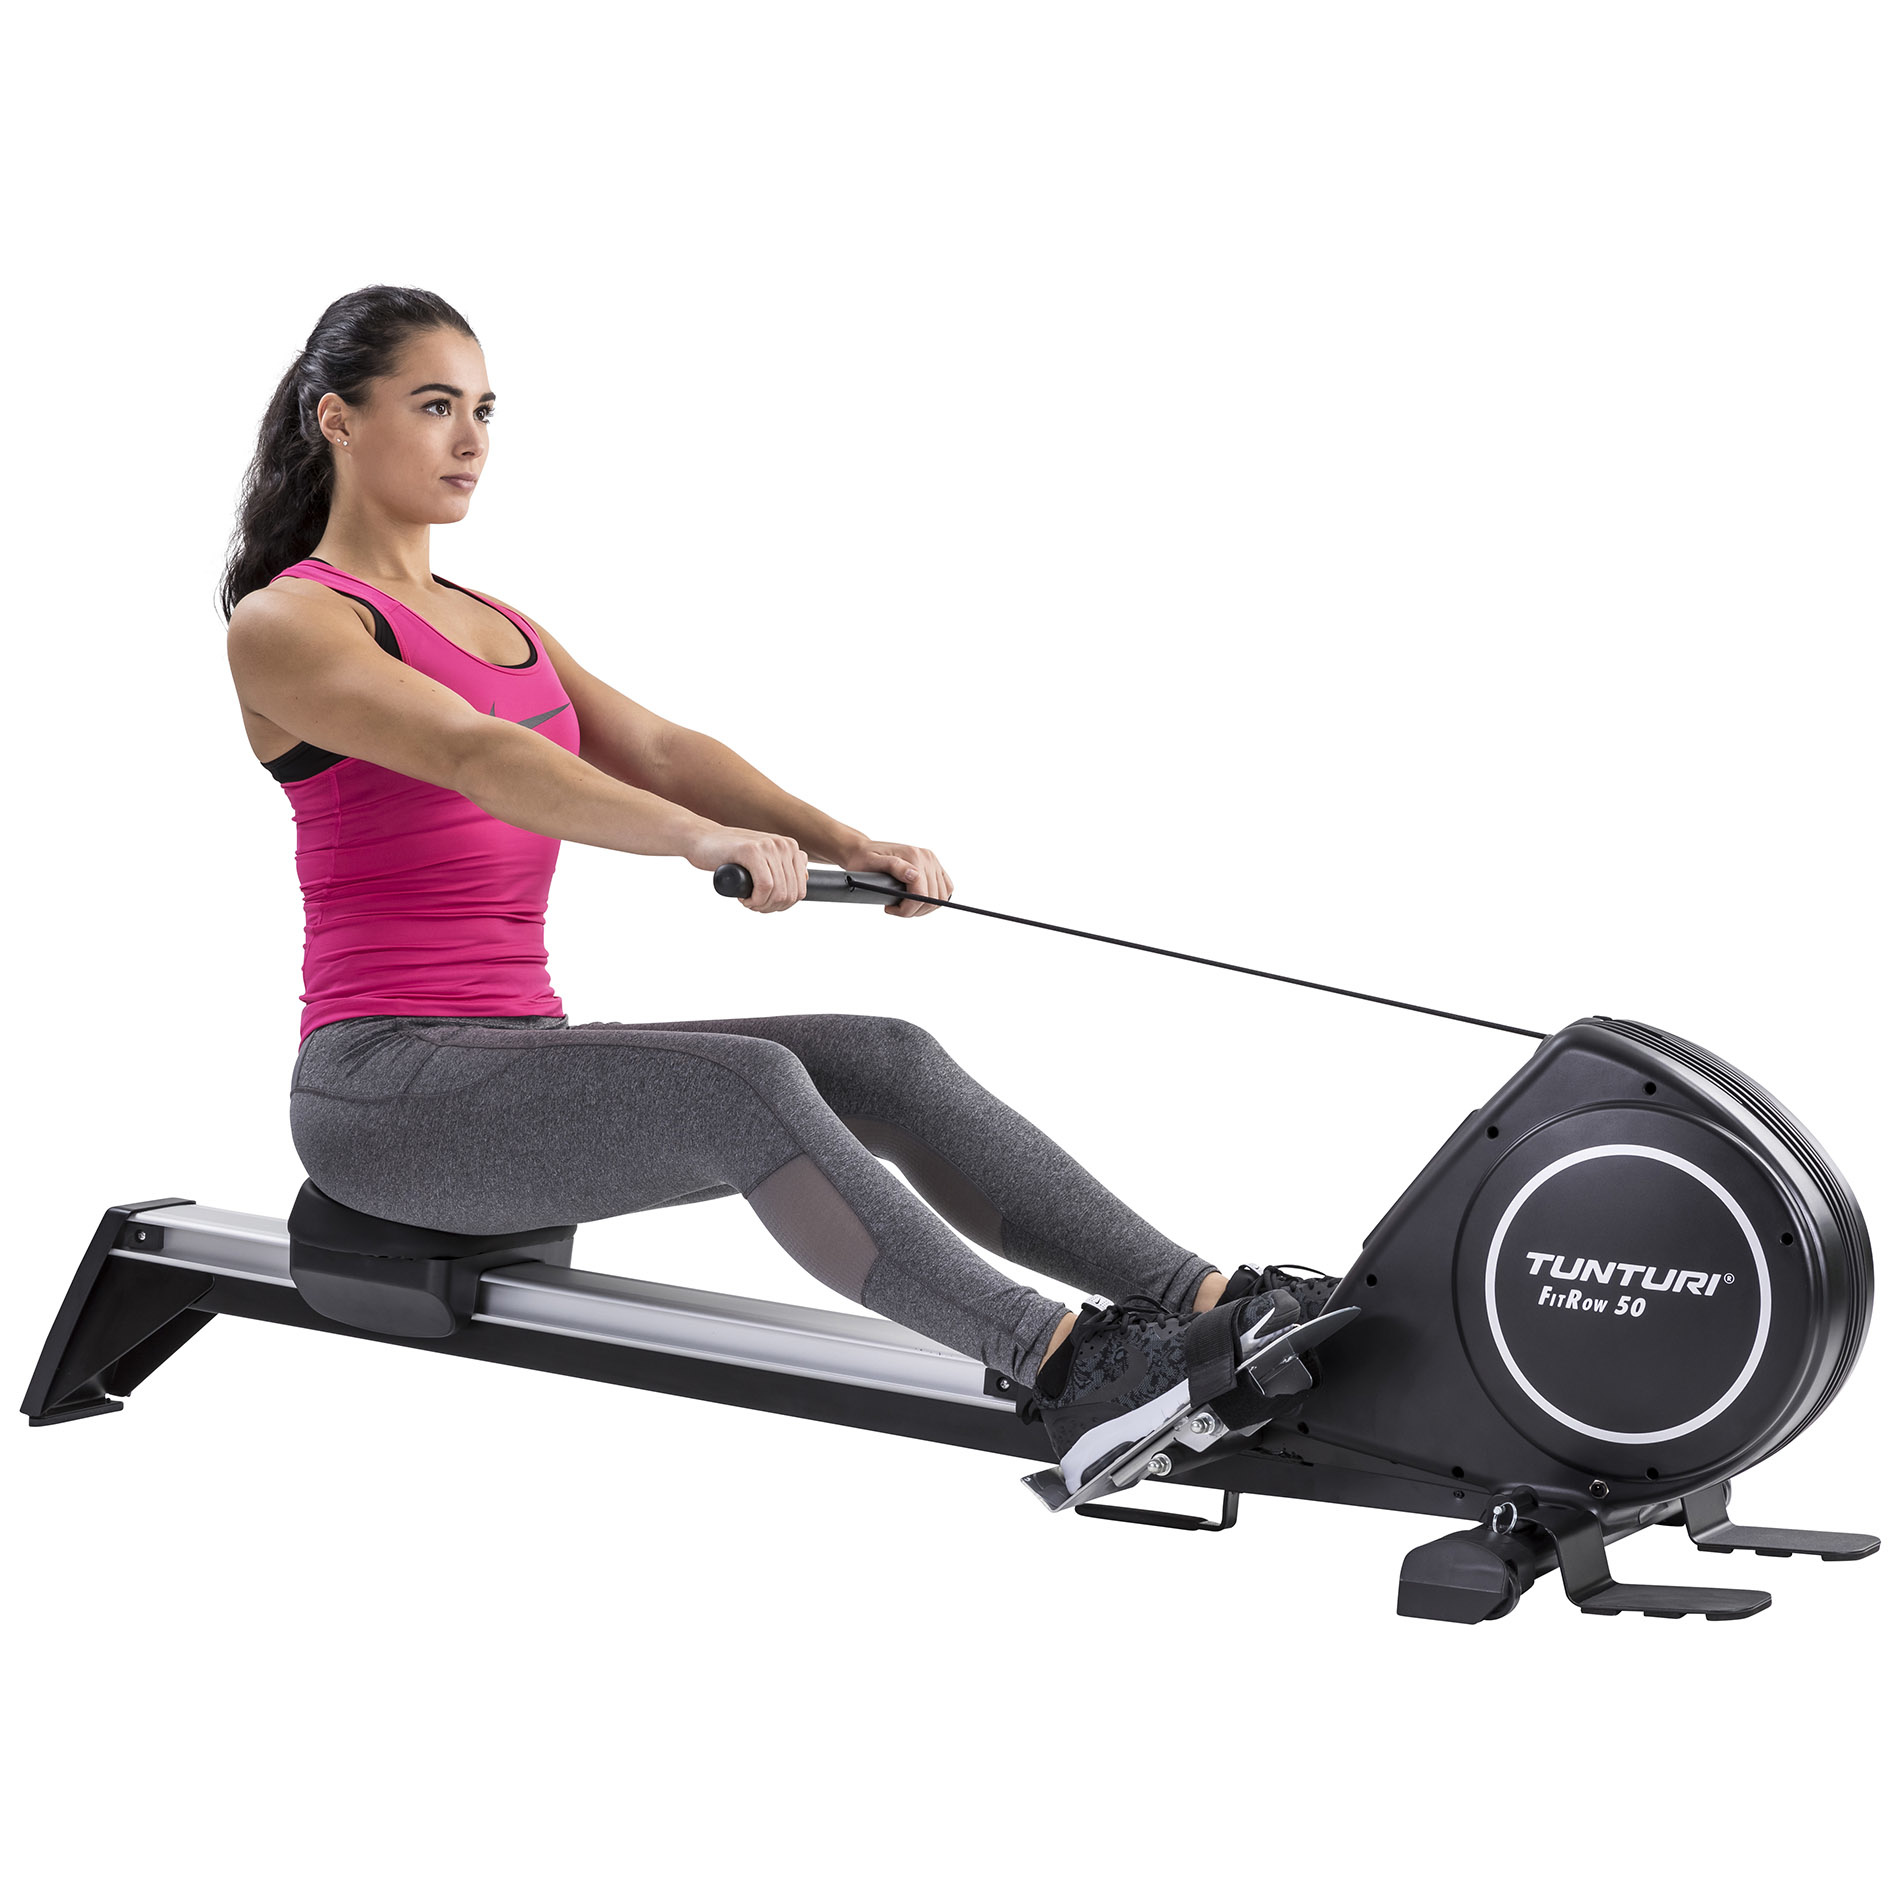 Rowing Machine FitRow 50 - Rower - 16 Resistance levels - Easy to move -  Tunturi New Fitness B.V.